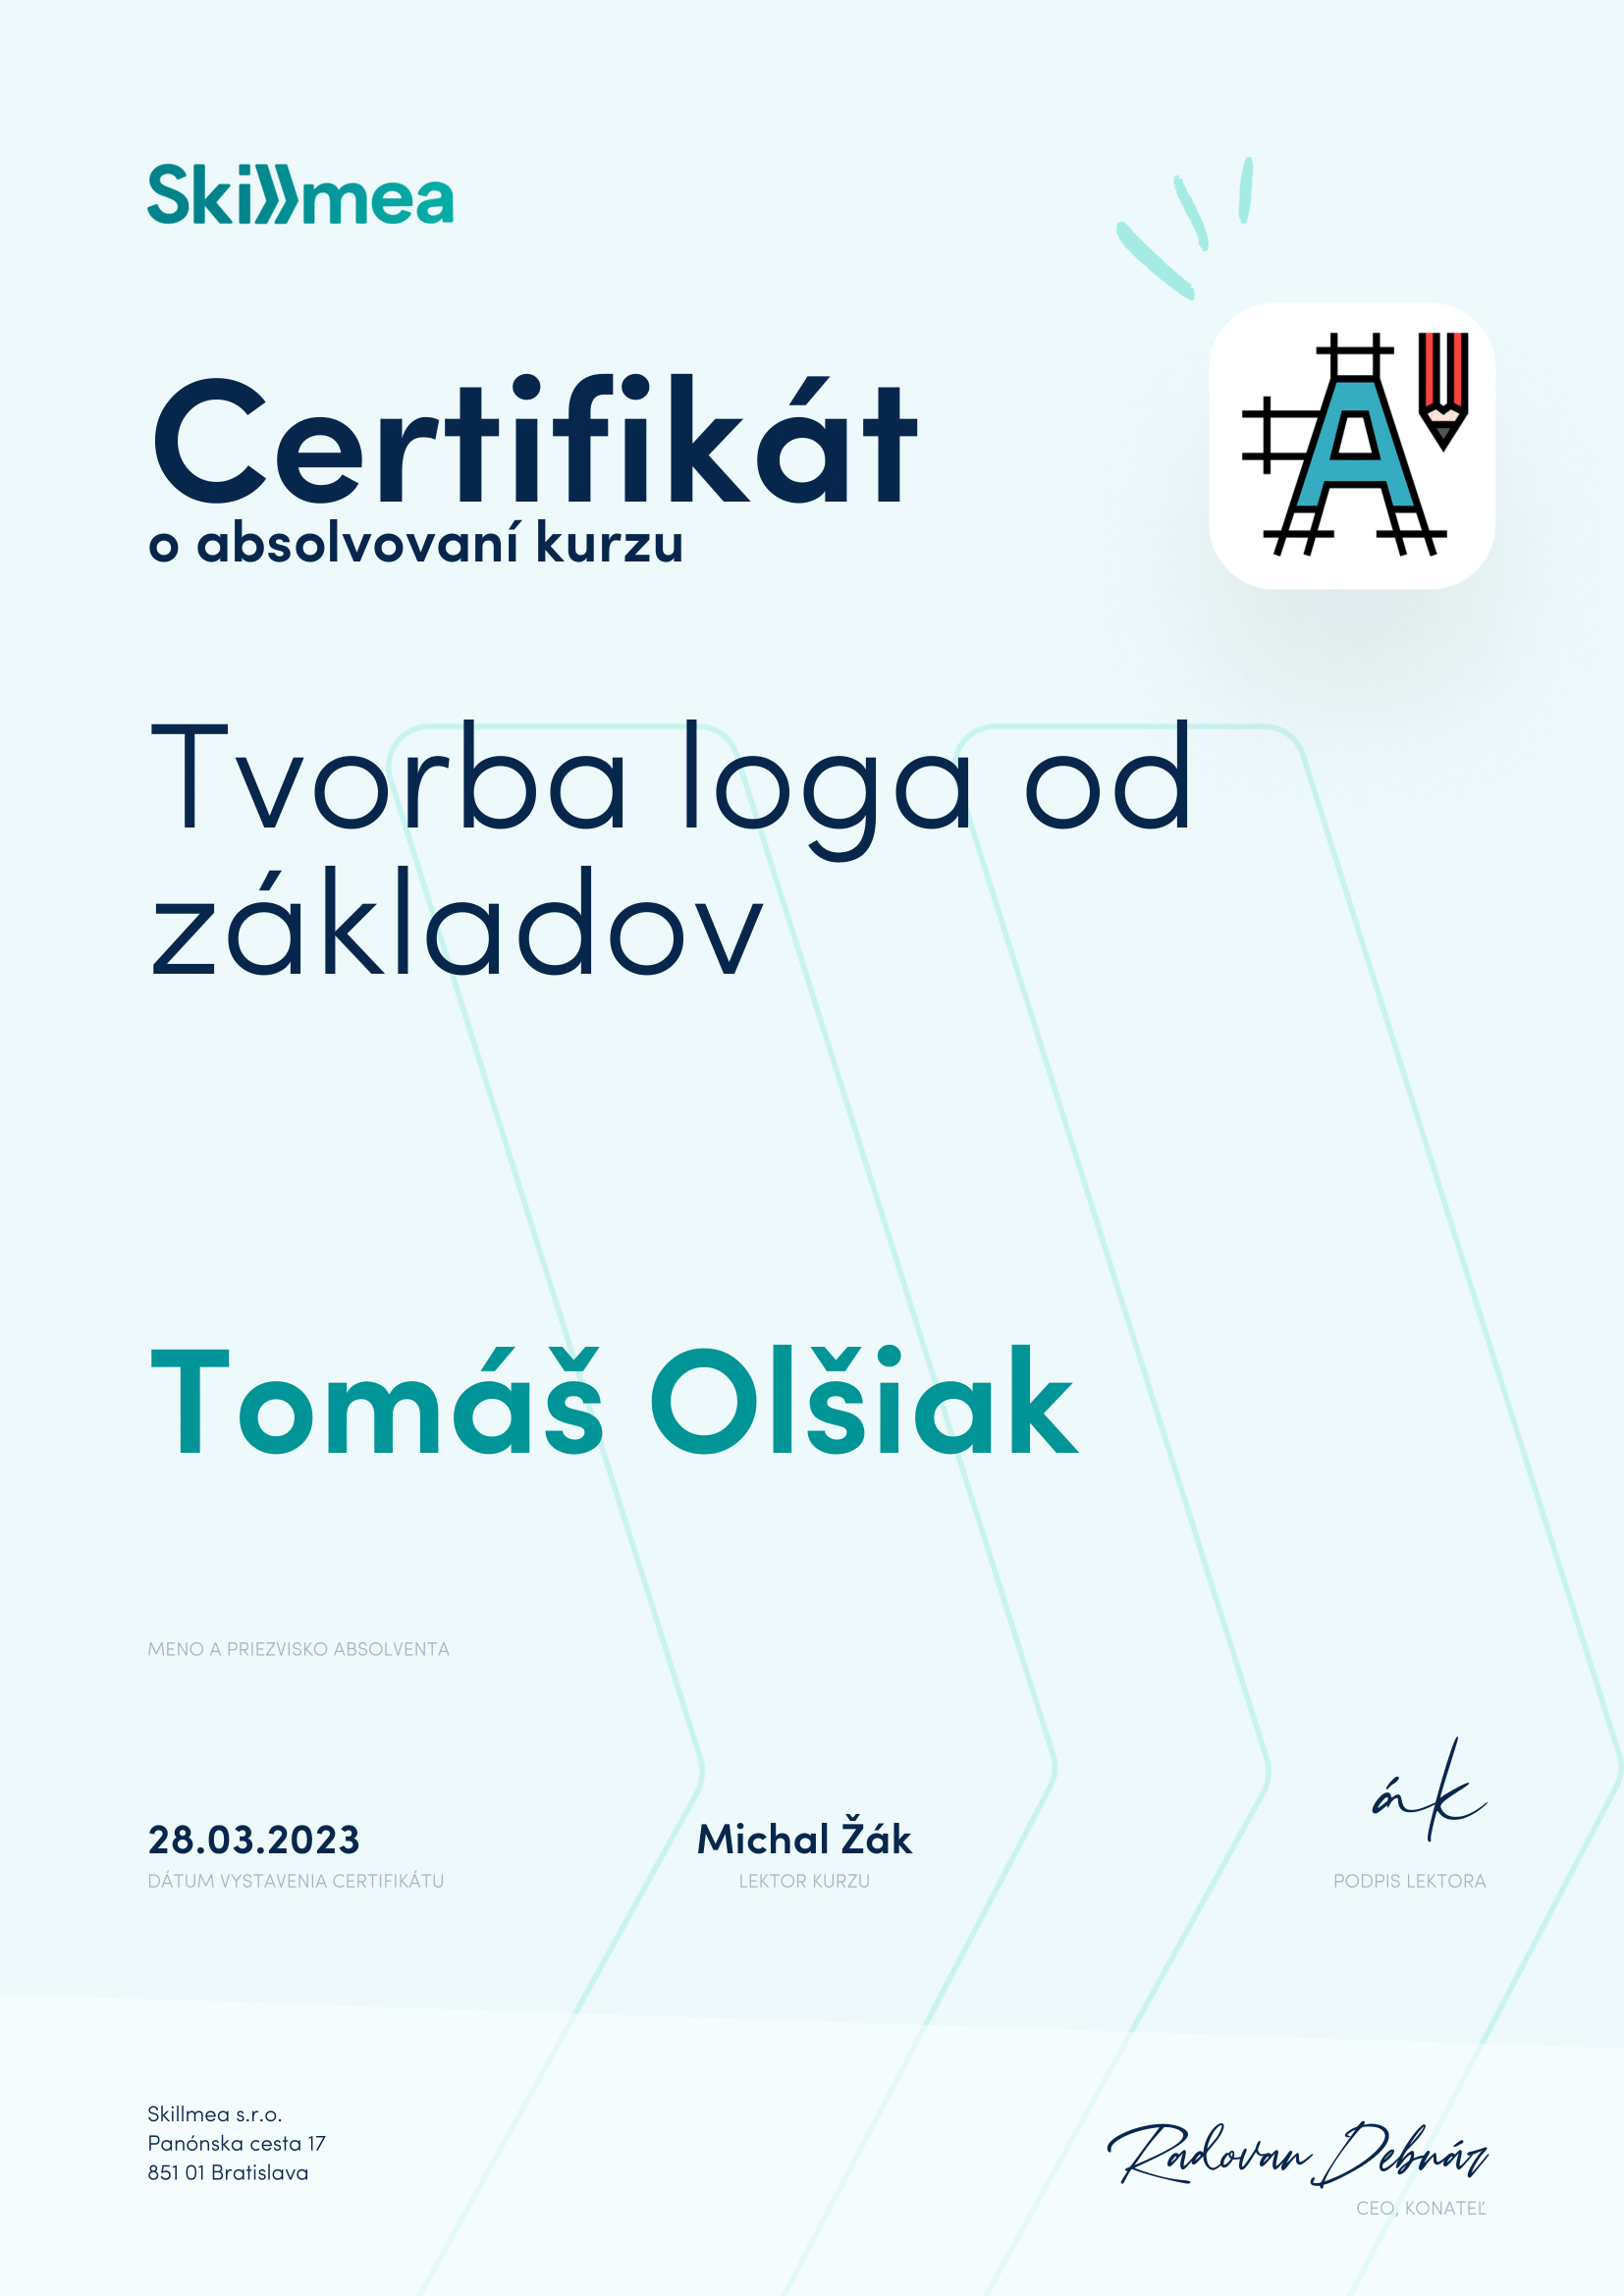 photo of my certificate for Logo Design